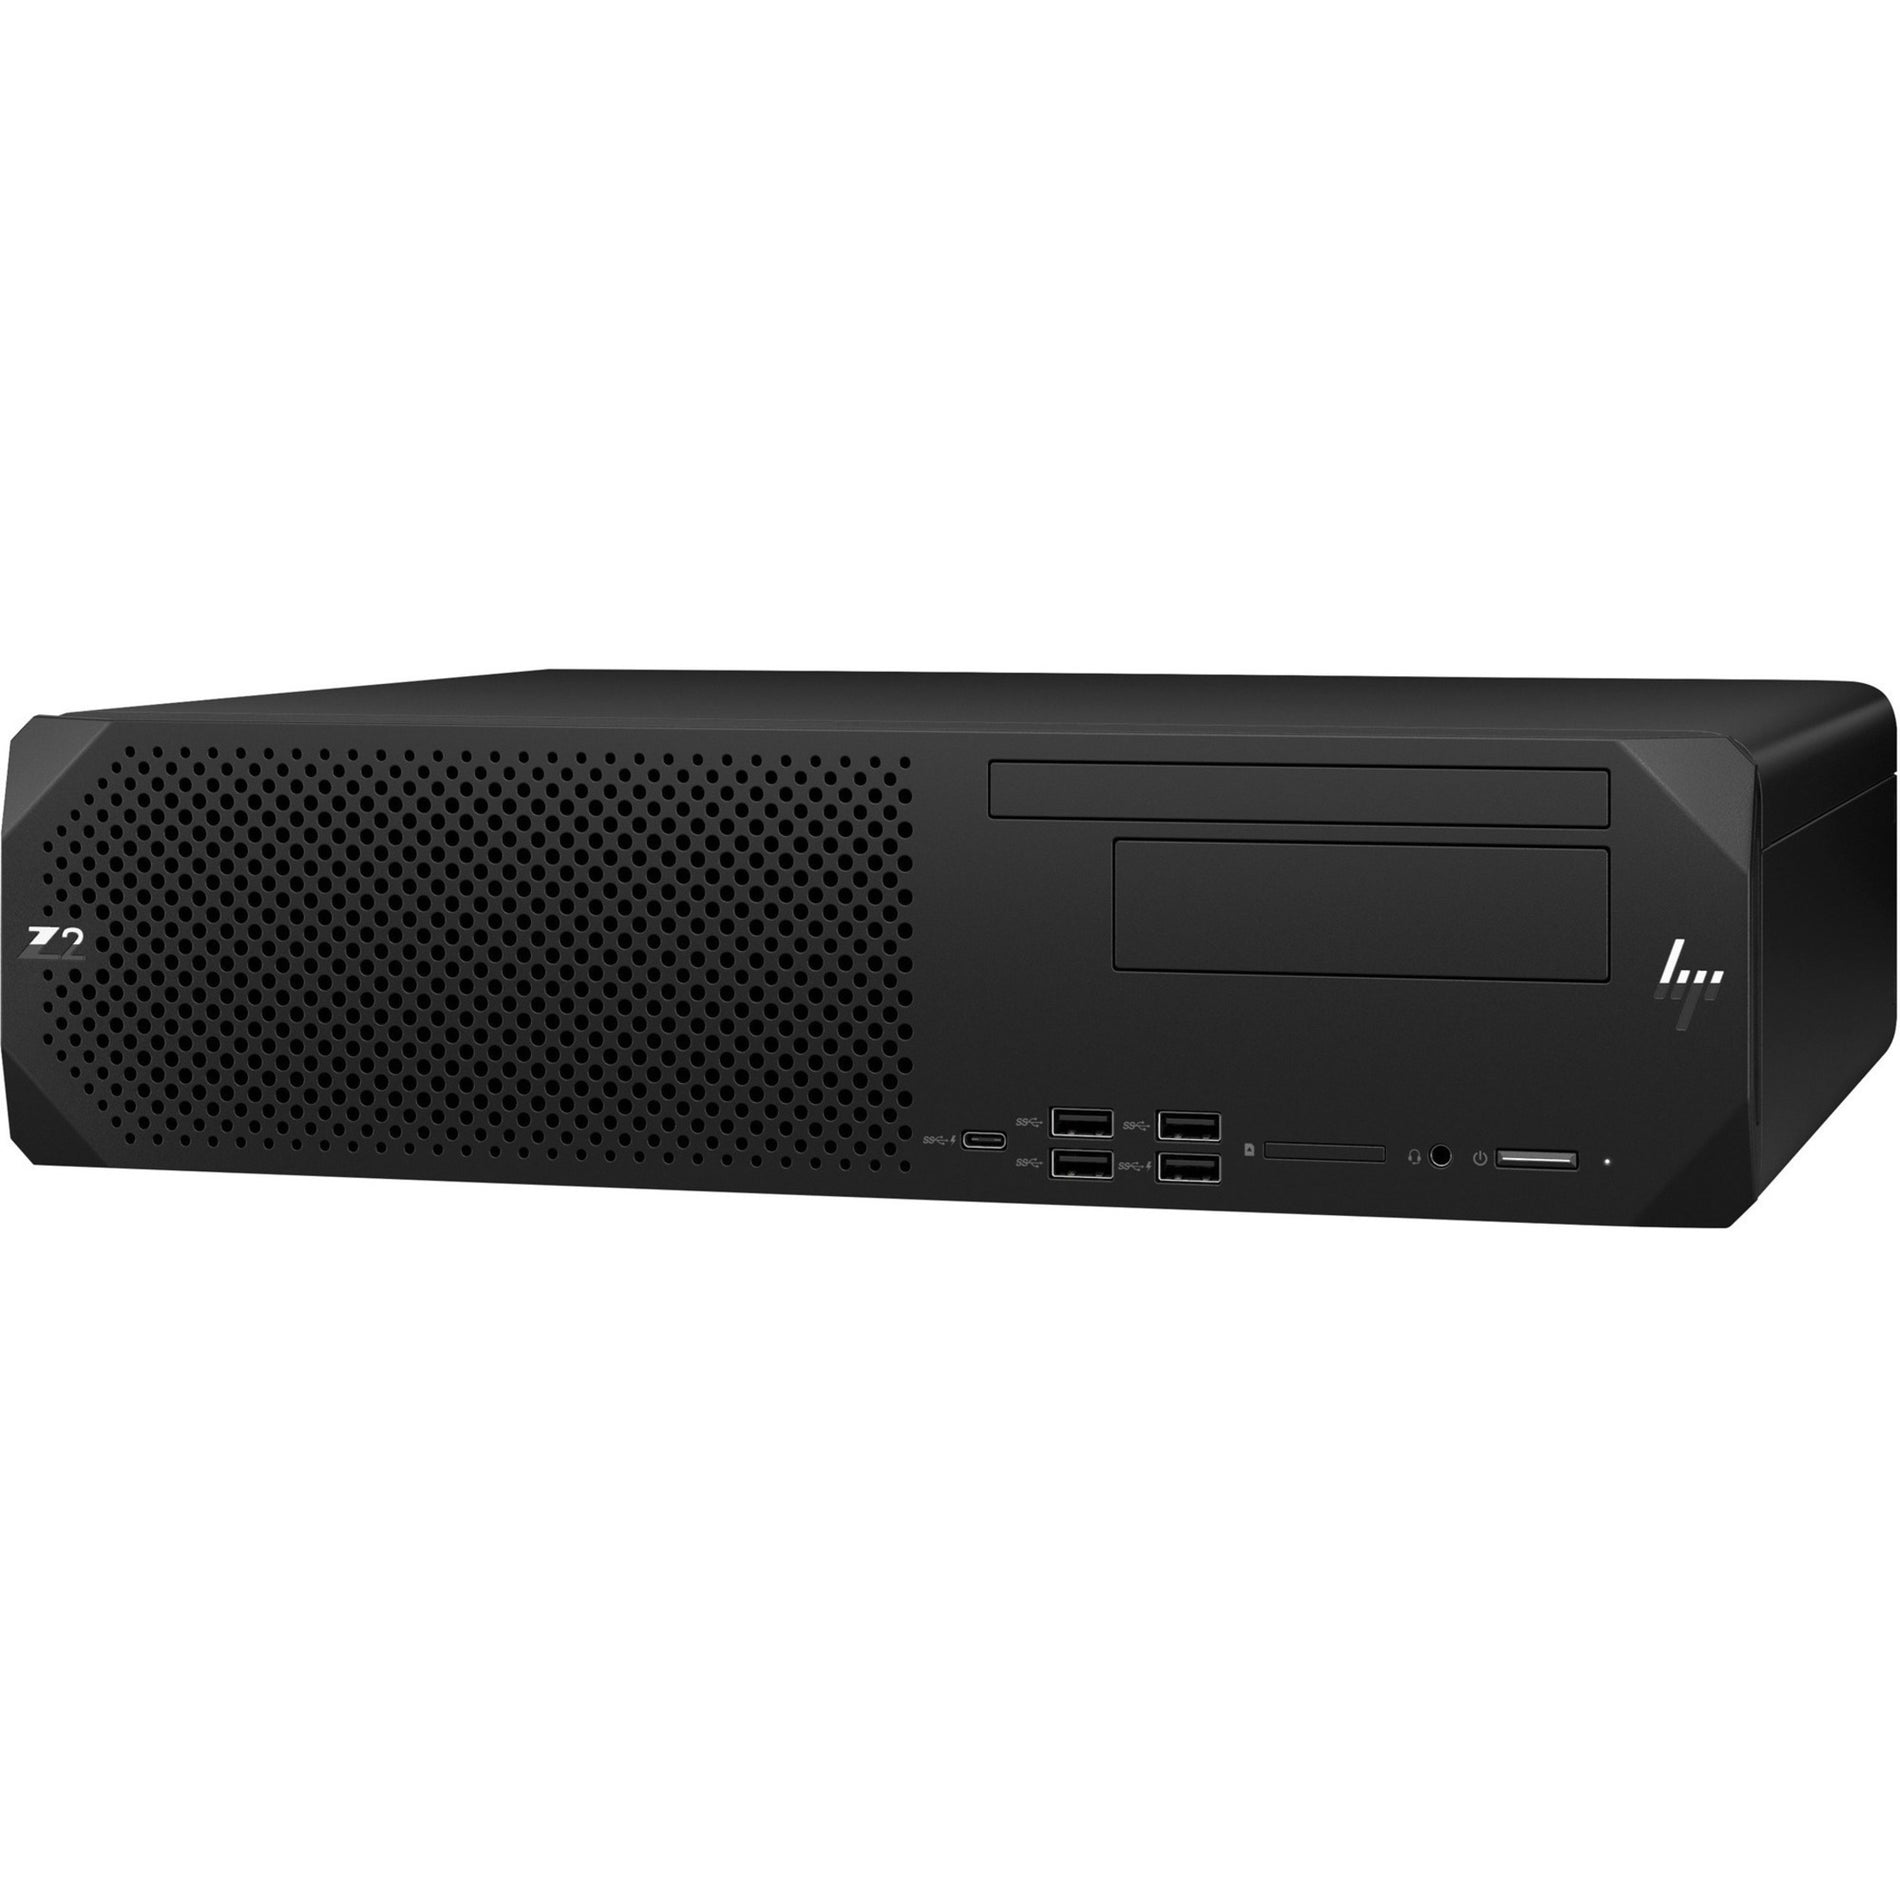 HP Z2 G9 Workstation - Intel Core i7 Dodeca-core - 32GB RAM - 512GB SSD - Small Form Factor [Discontinued]